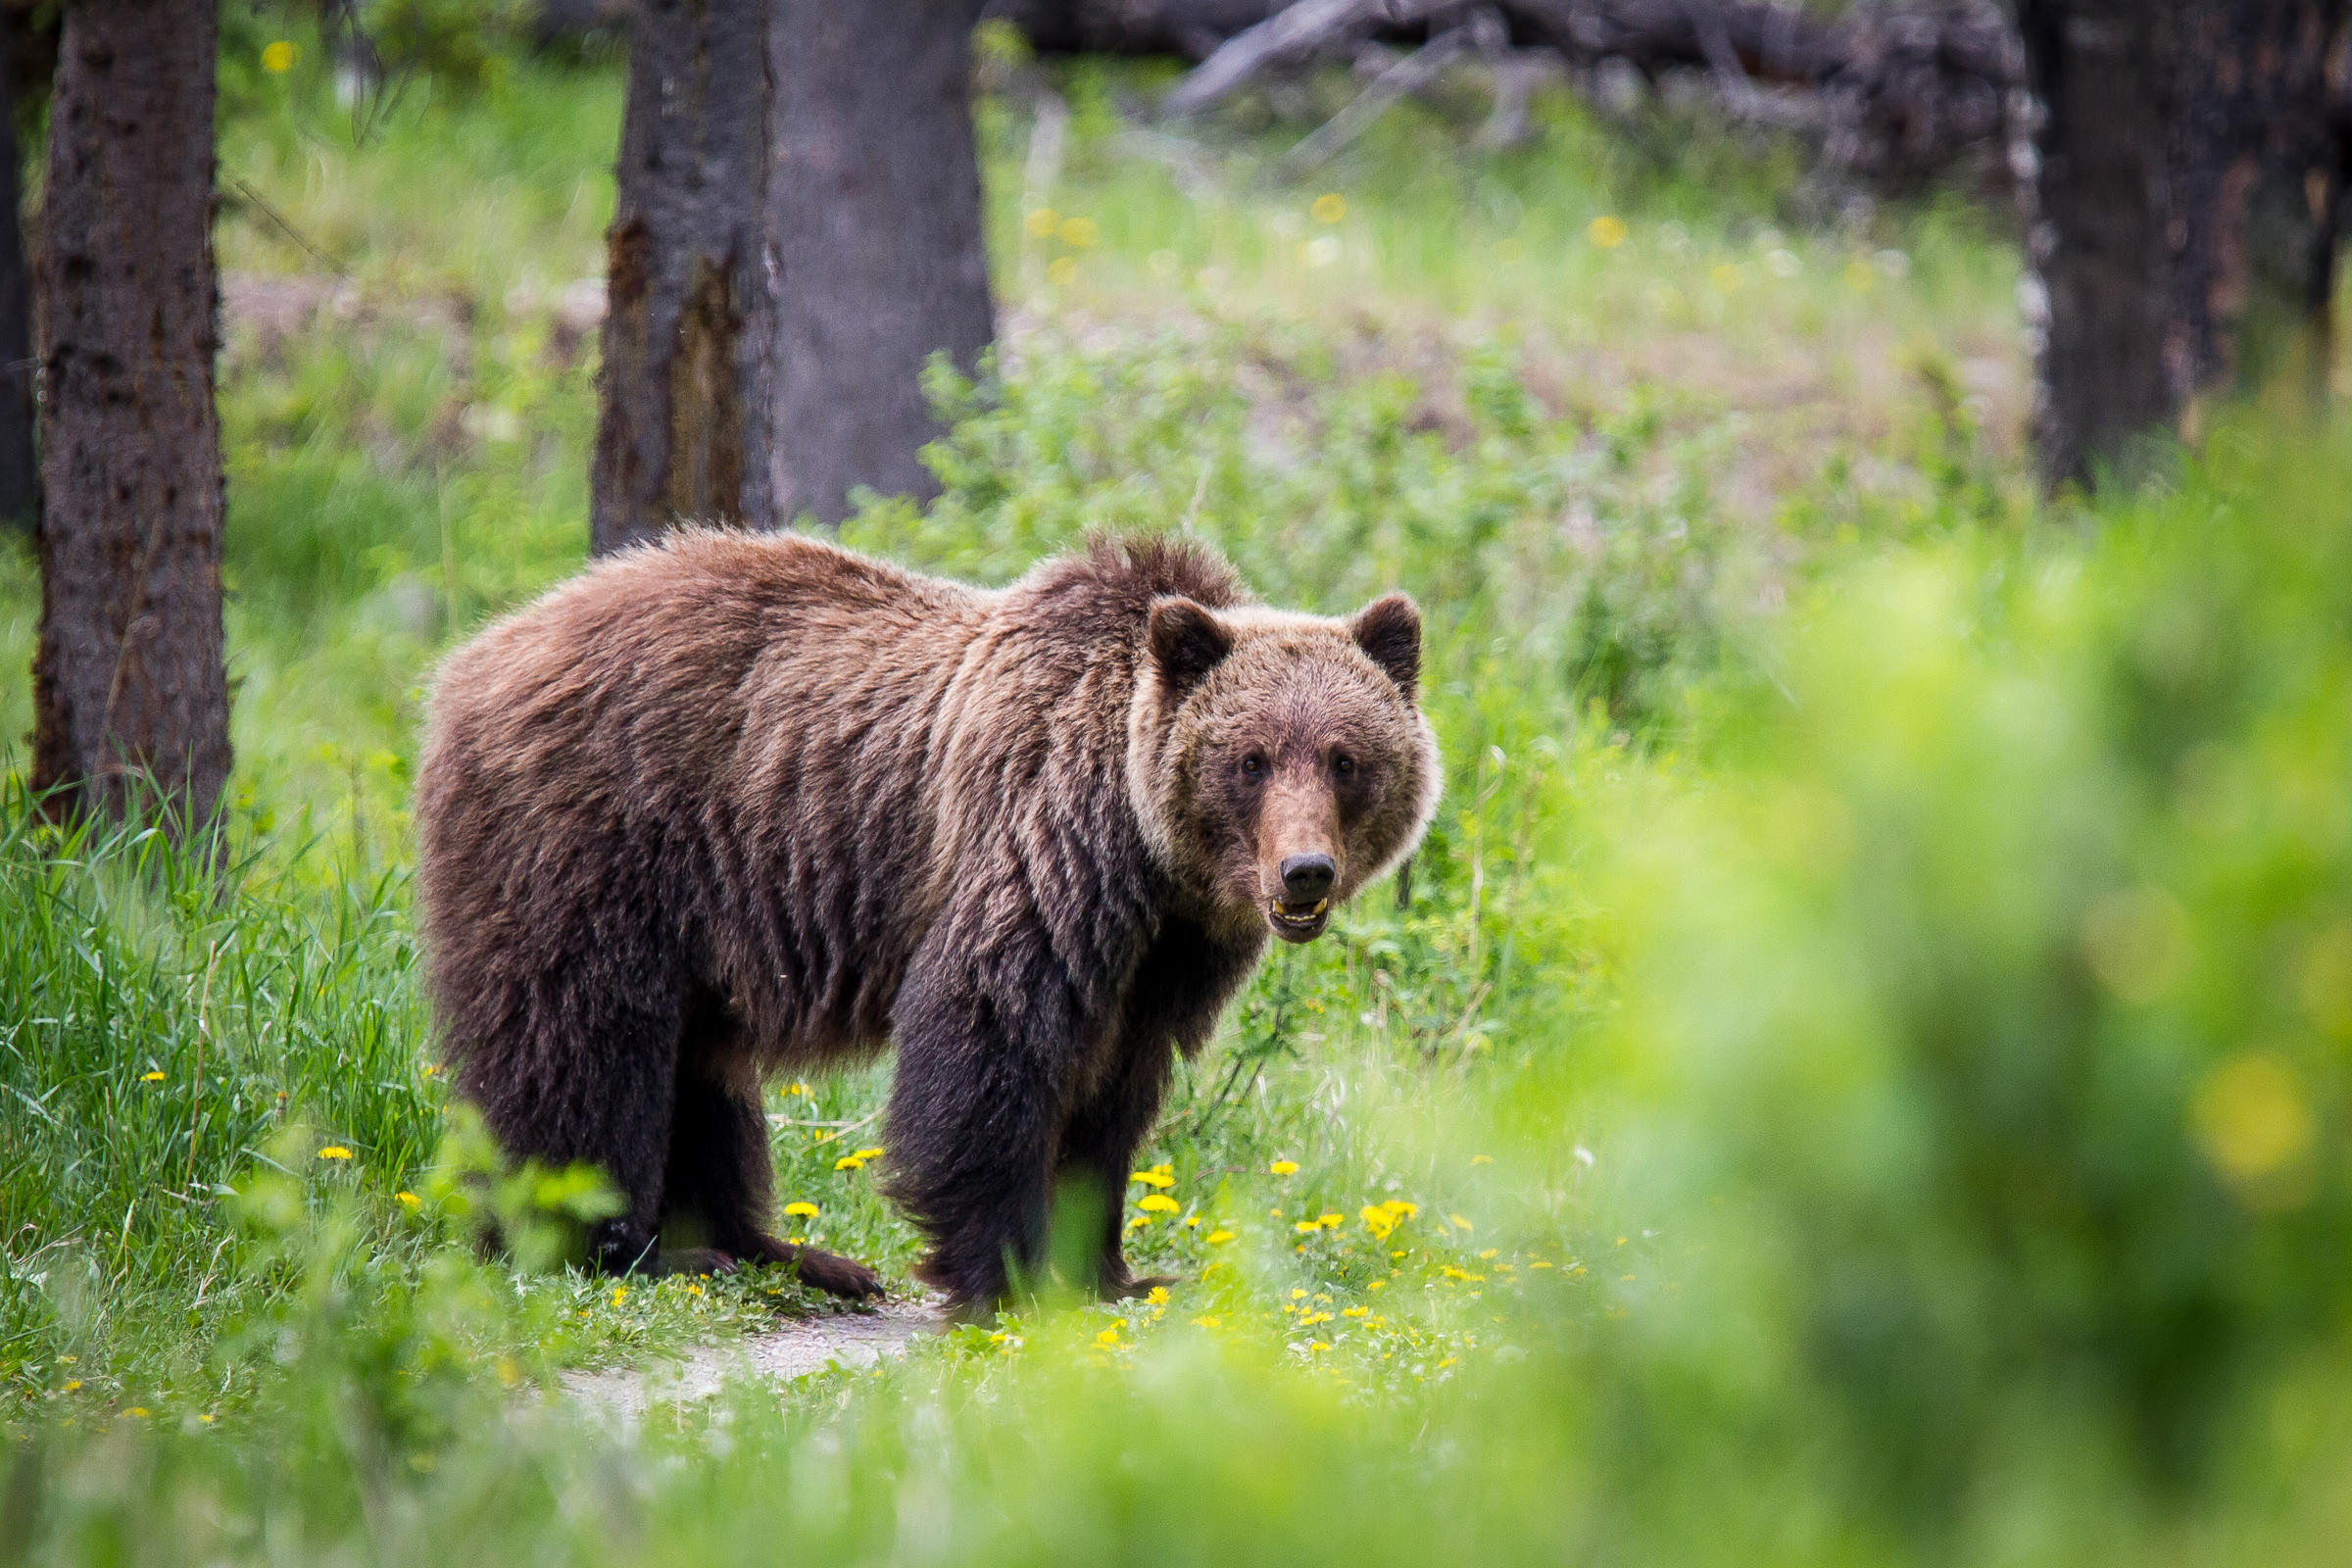 Groups Challenge New Wyoming Law That Could Allow Grizzly Bear Hunt ...